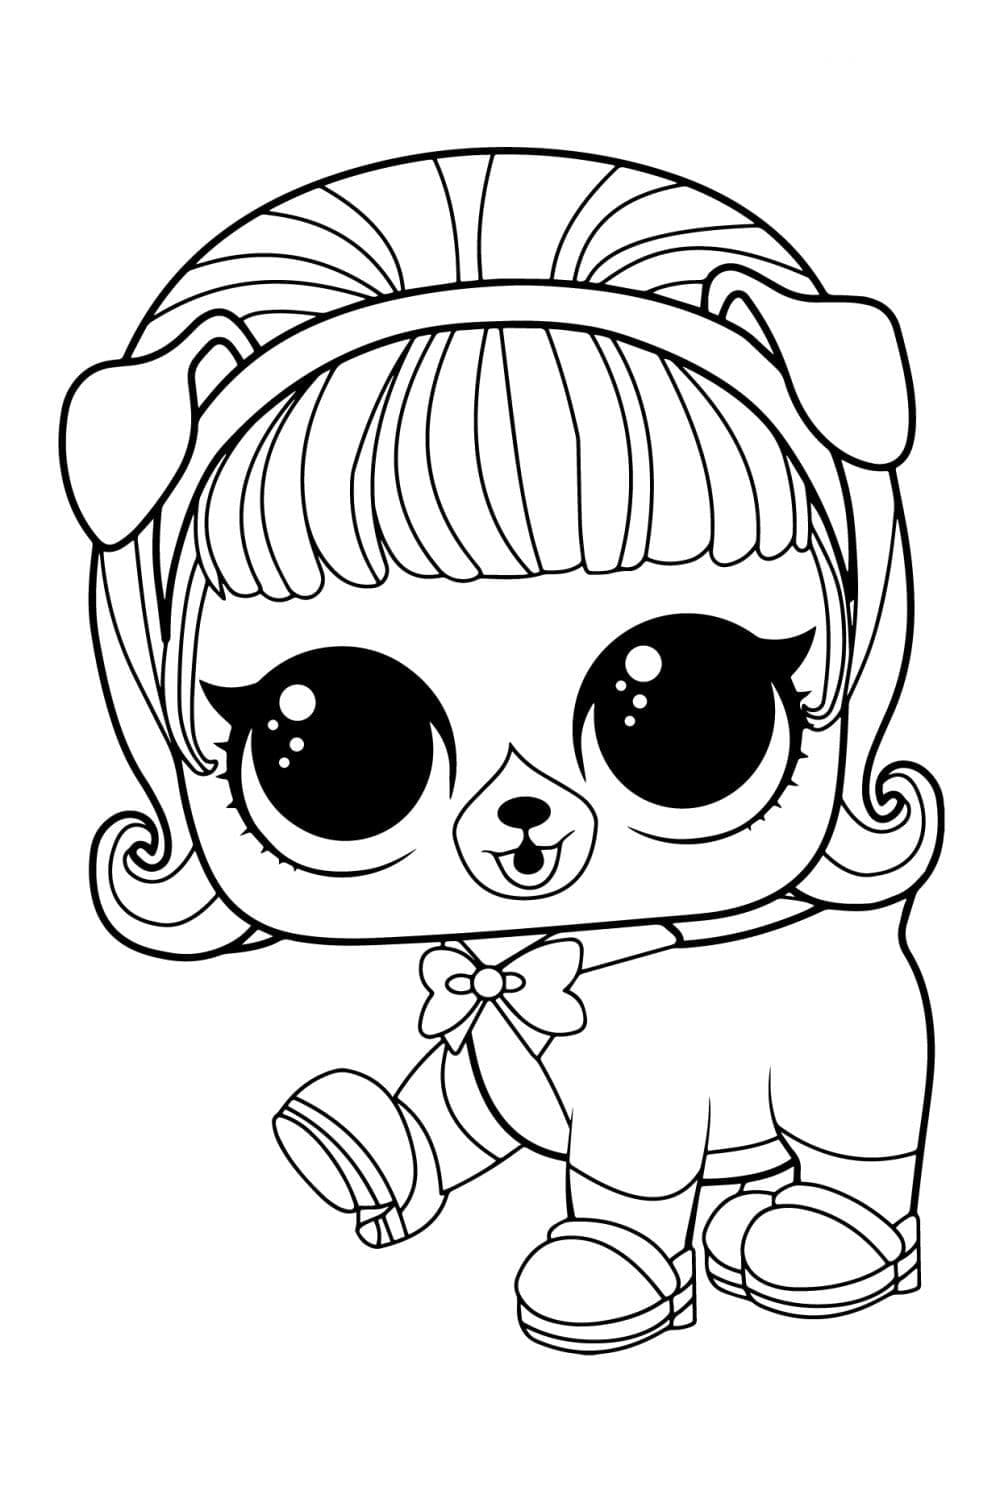 Madame Pup LOL coloring page